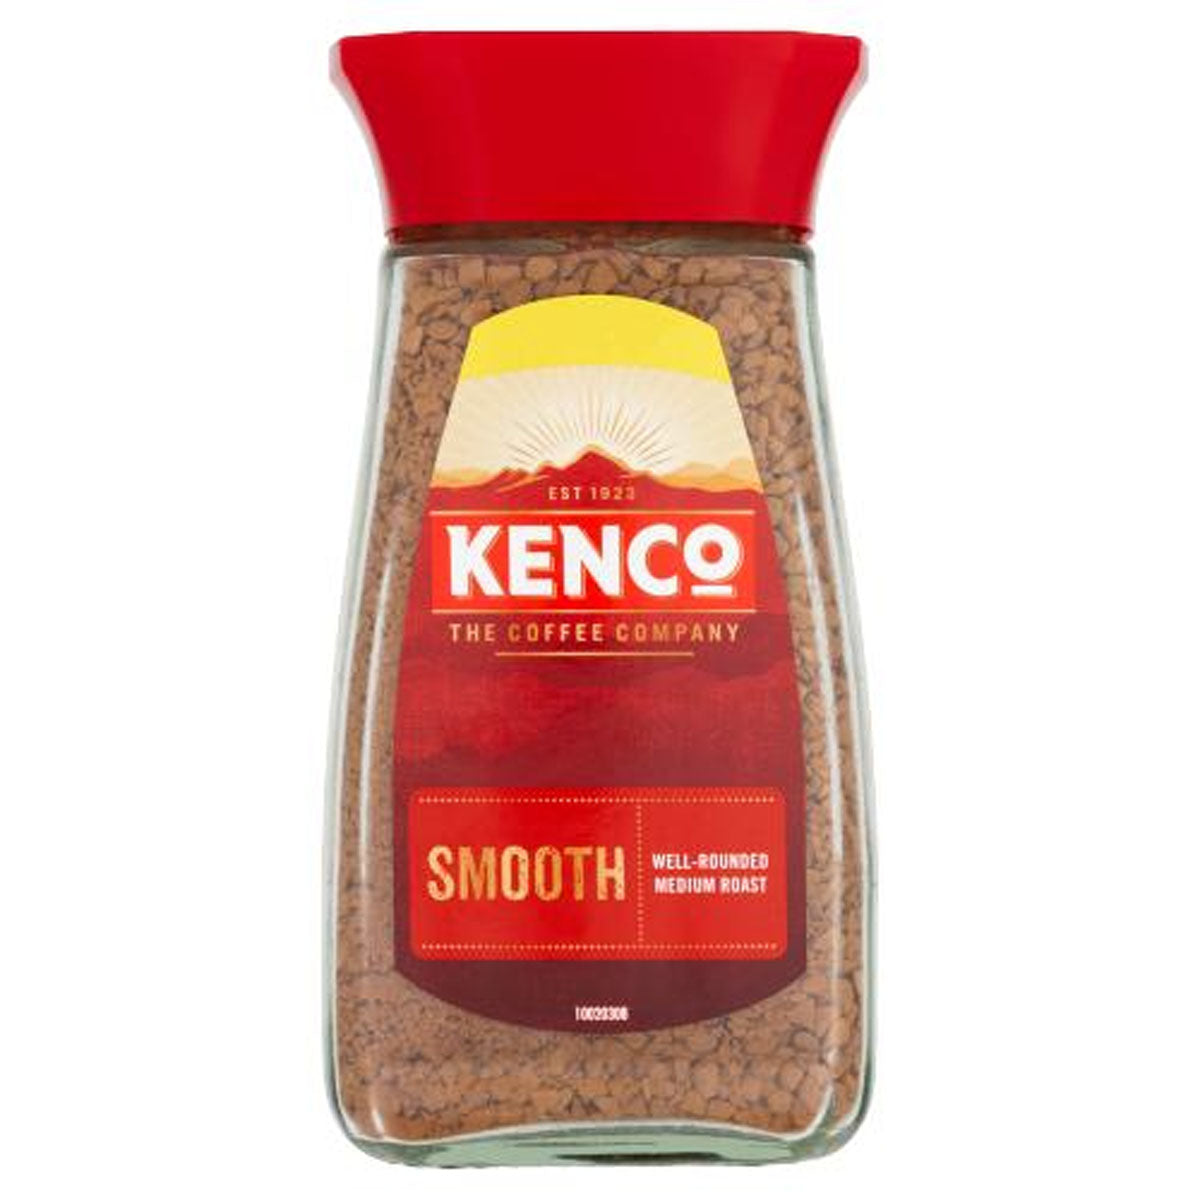 Kenco - Smooth Well-Rounded Medium Roast - 100g - Continental Food Store